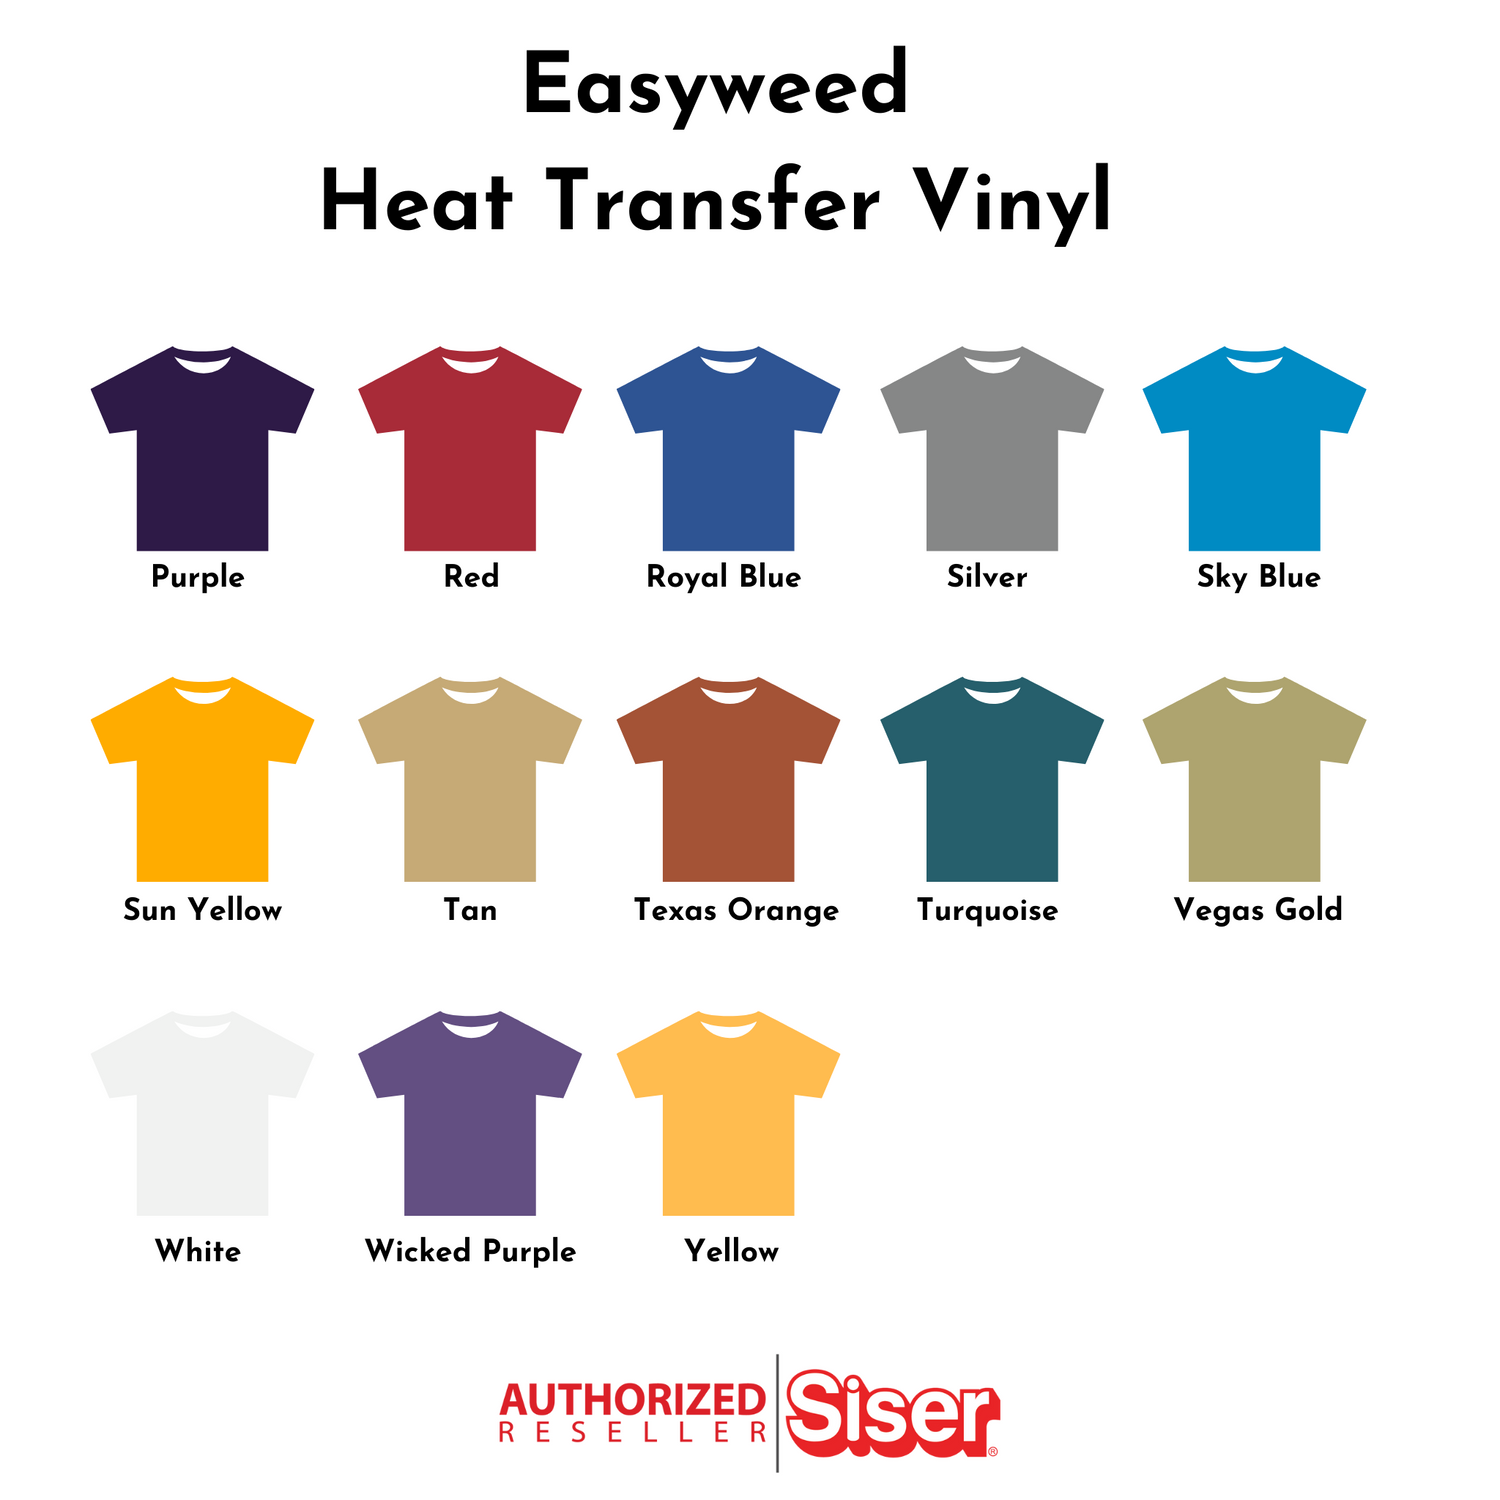 Siser EasyWeed Heat Transfer Vinyl HTV for T-shirts 12 by 3' Roll (Sun Yellow)